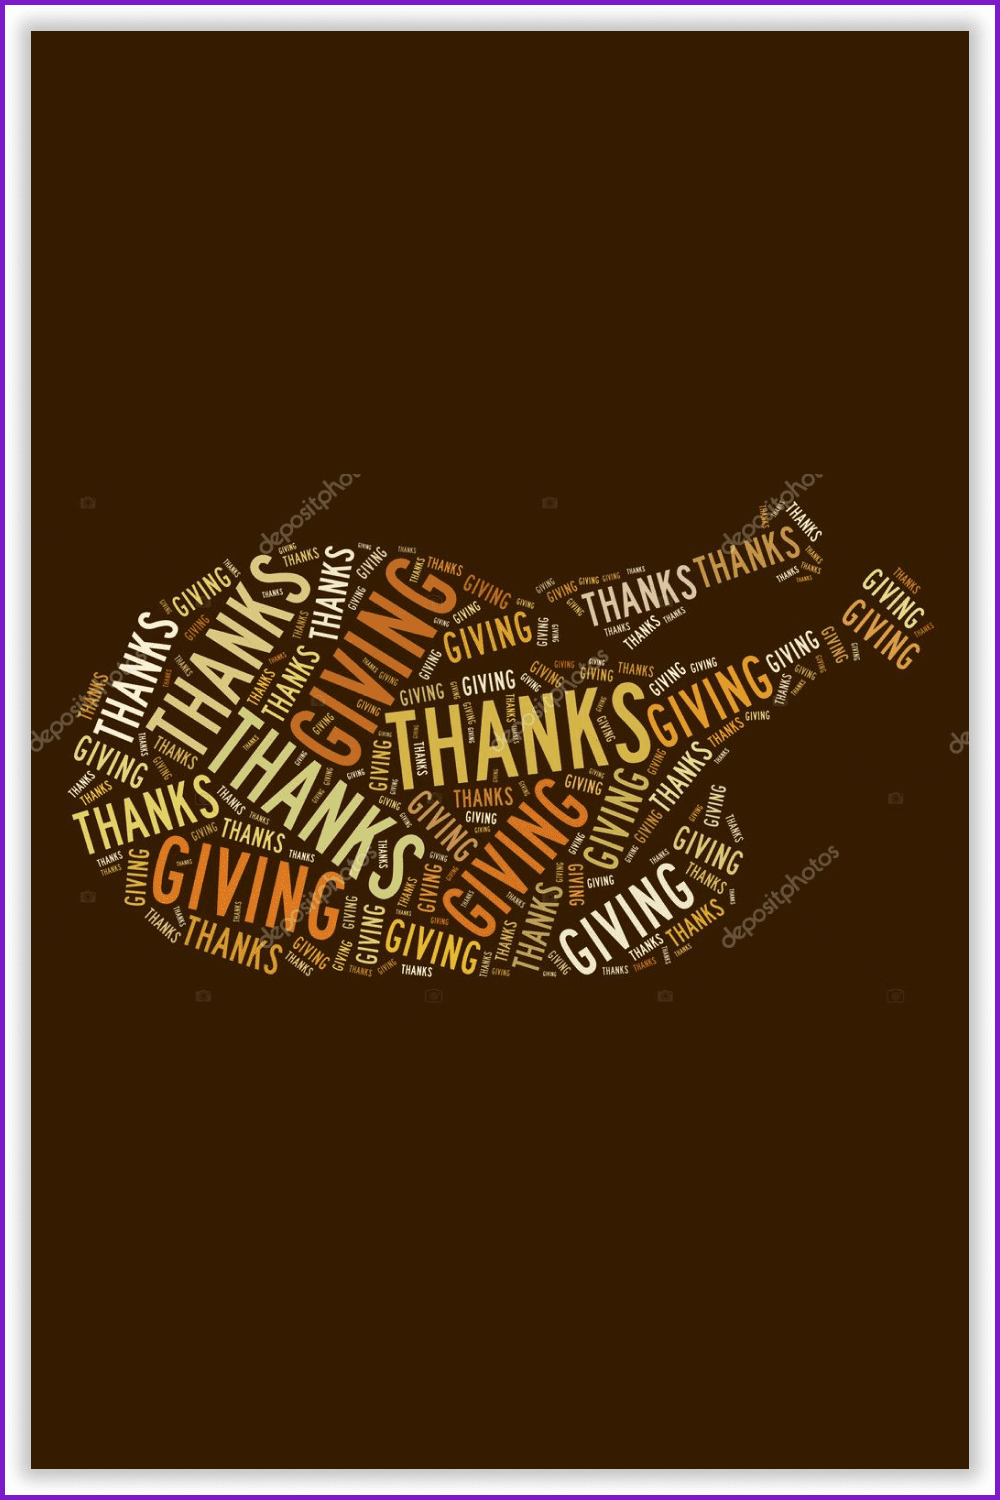 Turkey silhouette made from words Thans and Giving.